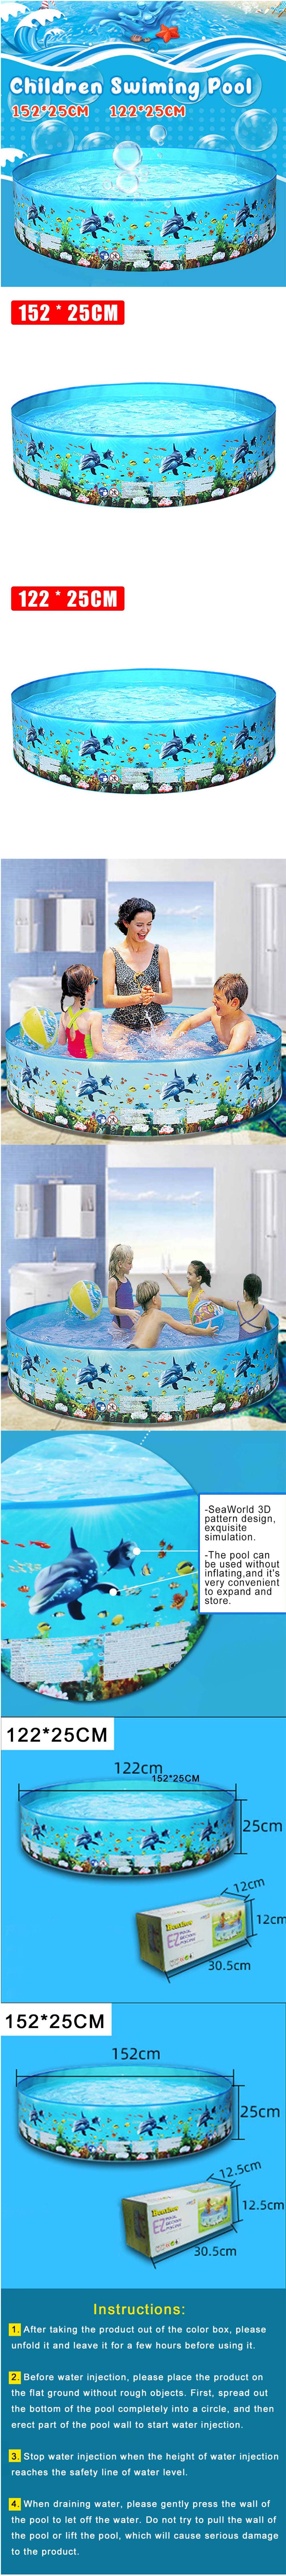 4ft-8ft-Family-Swimming-Pool-Garden-Outdoor-Summer-Kids-Paddling-Pools-No-Inflation-Pool-1933364-1